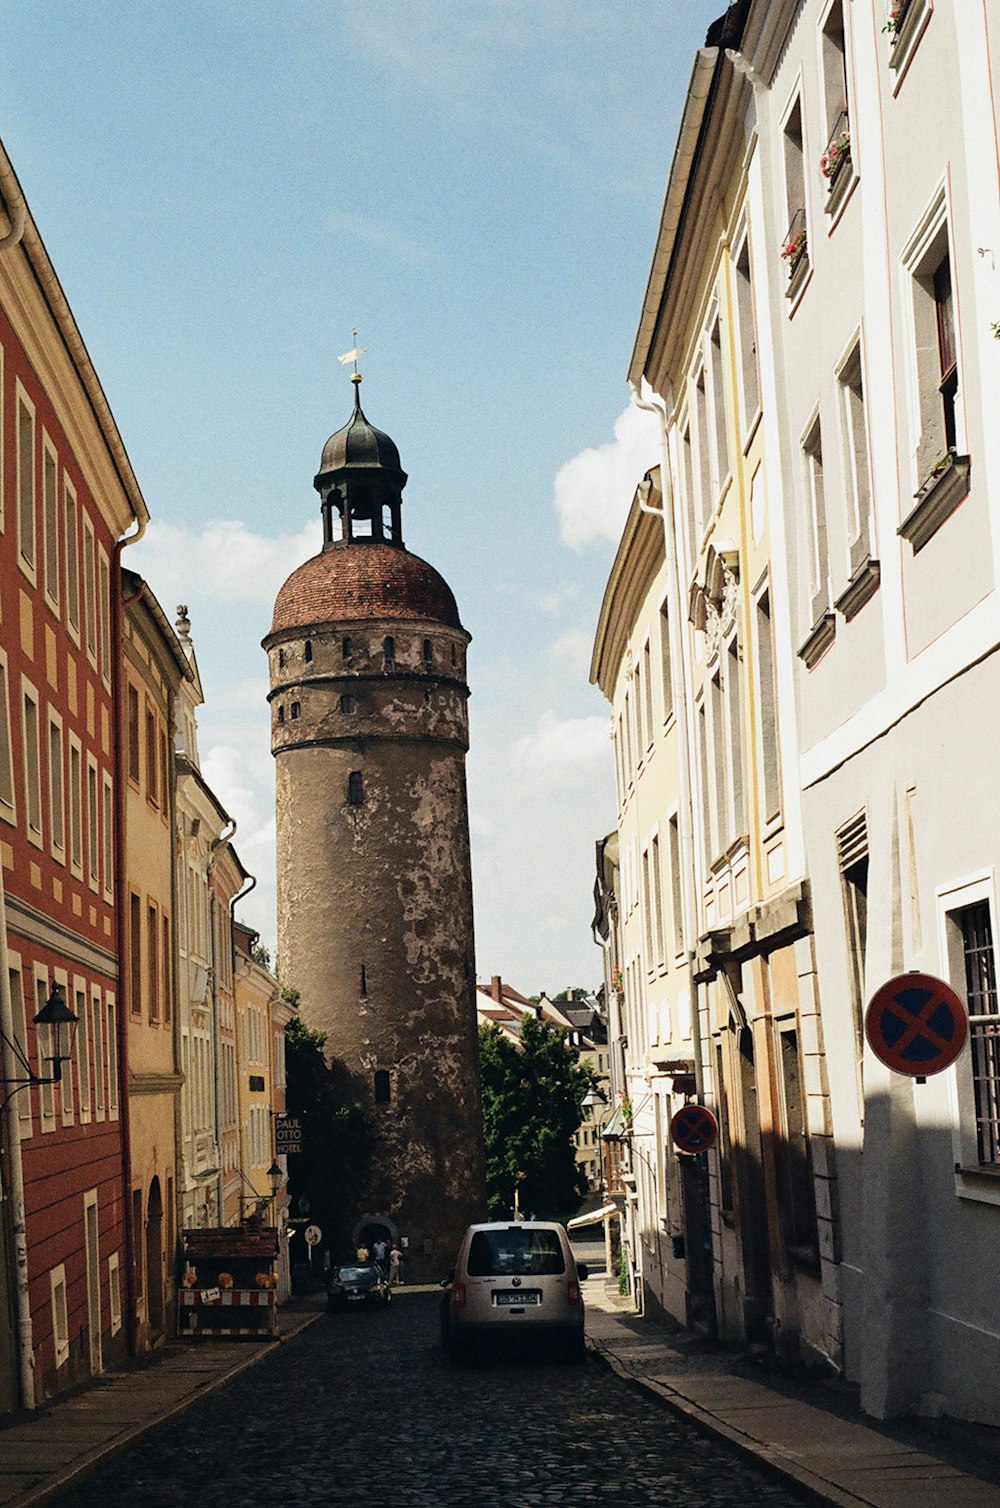 a car is parked in front of a tall tower